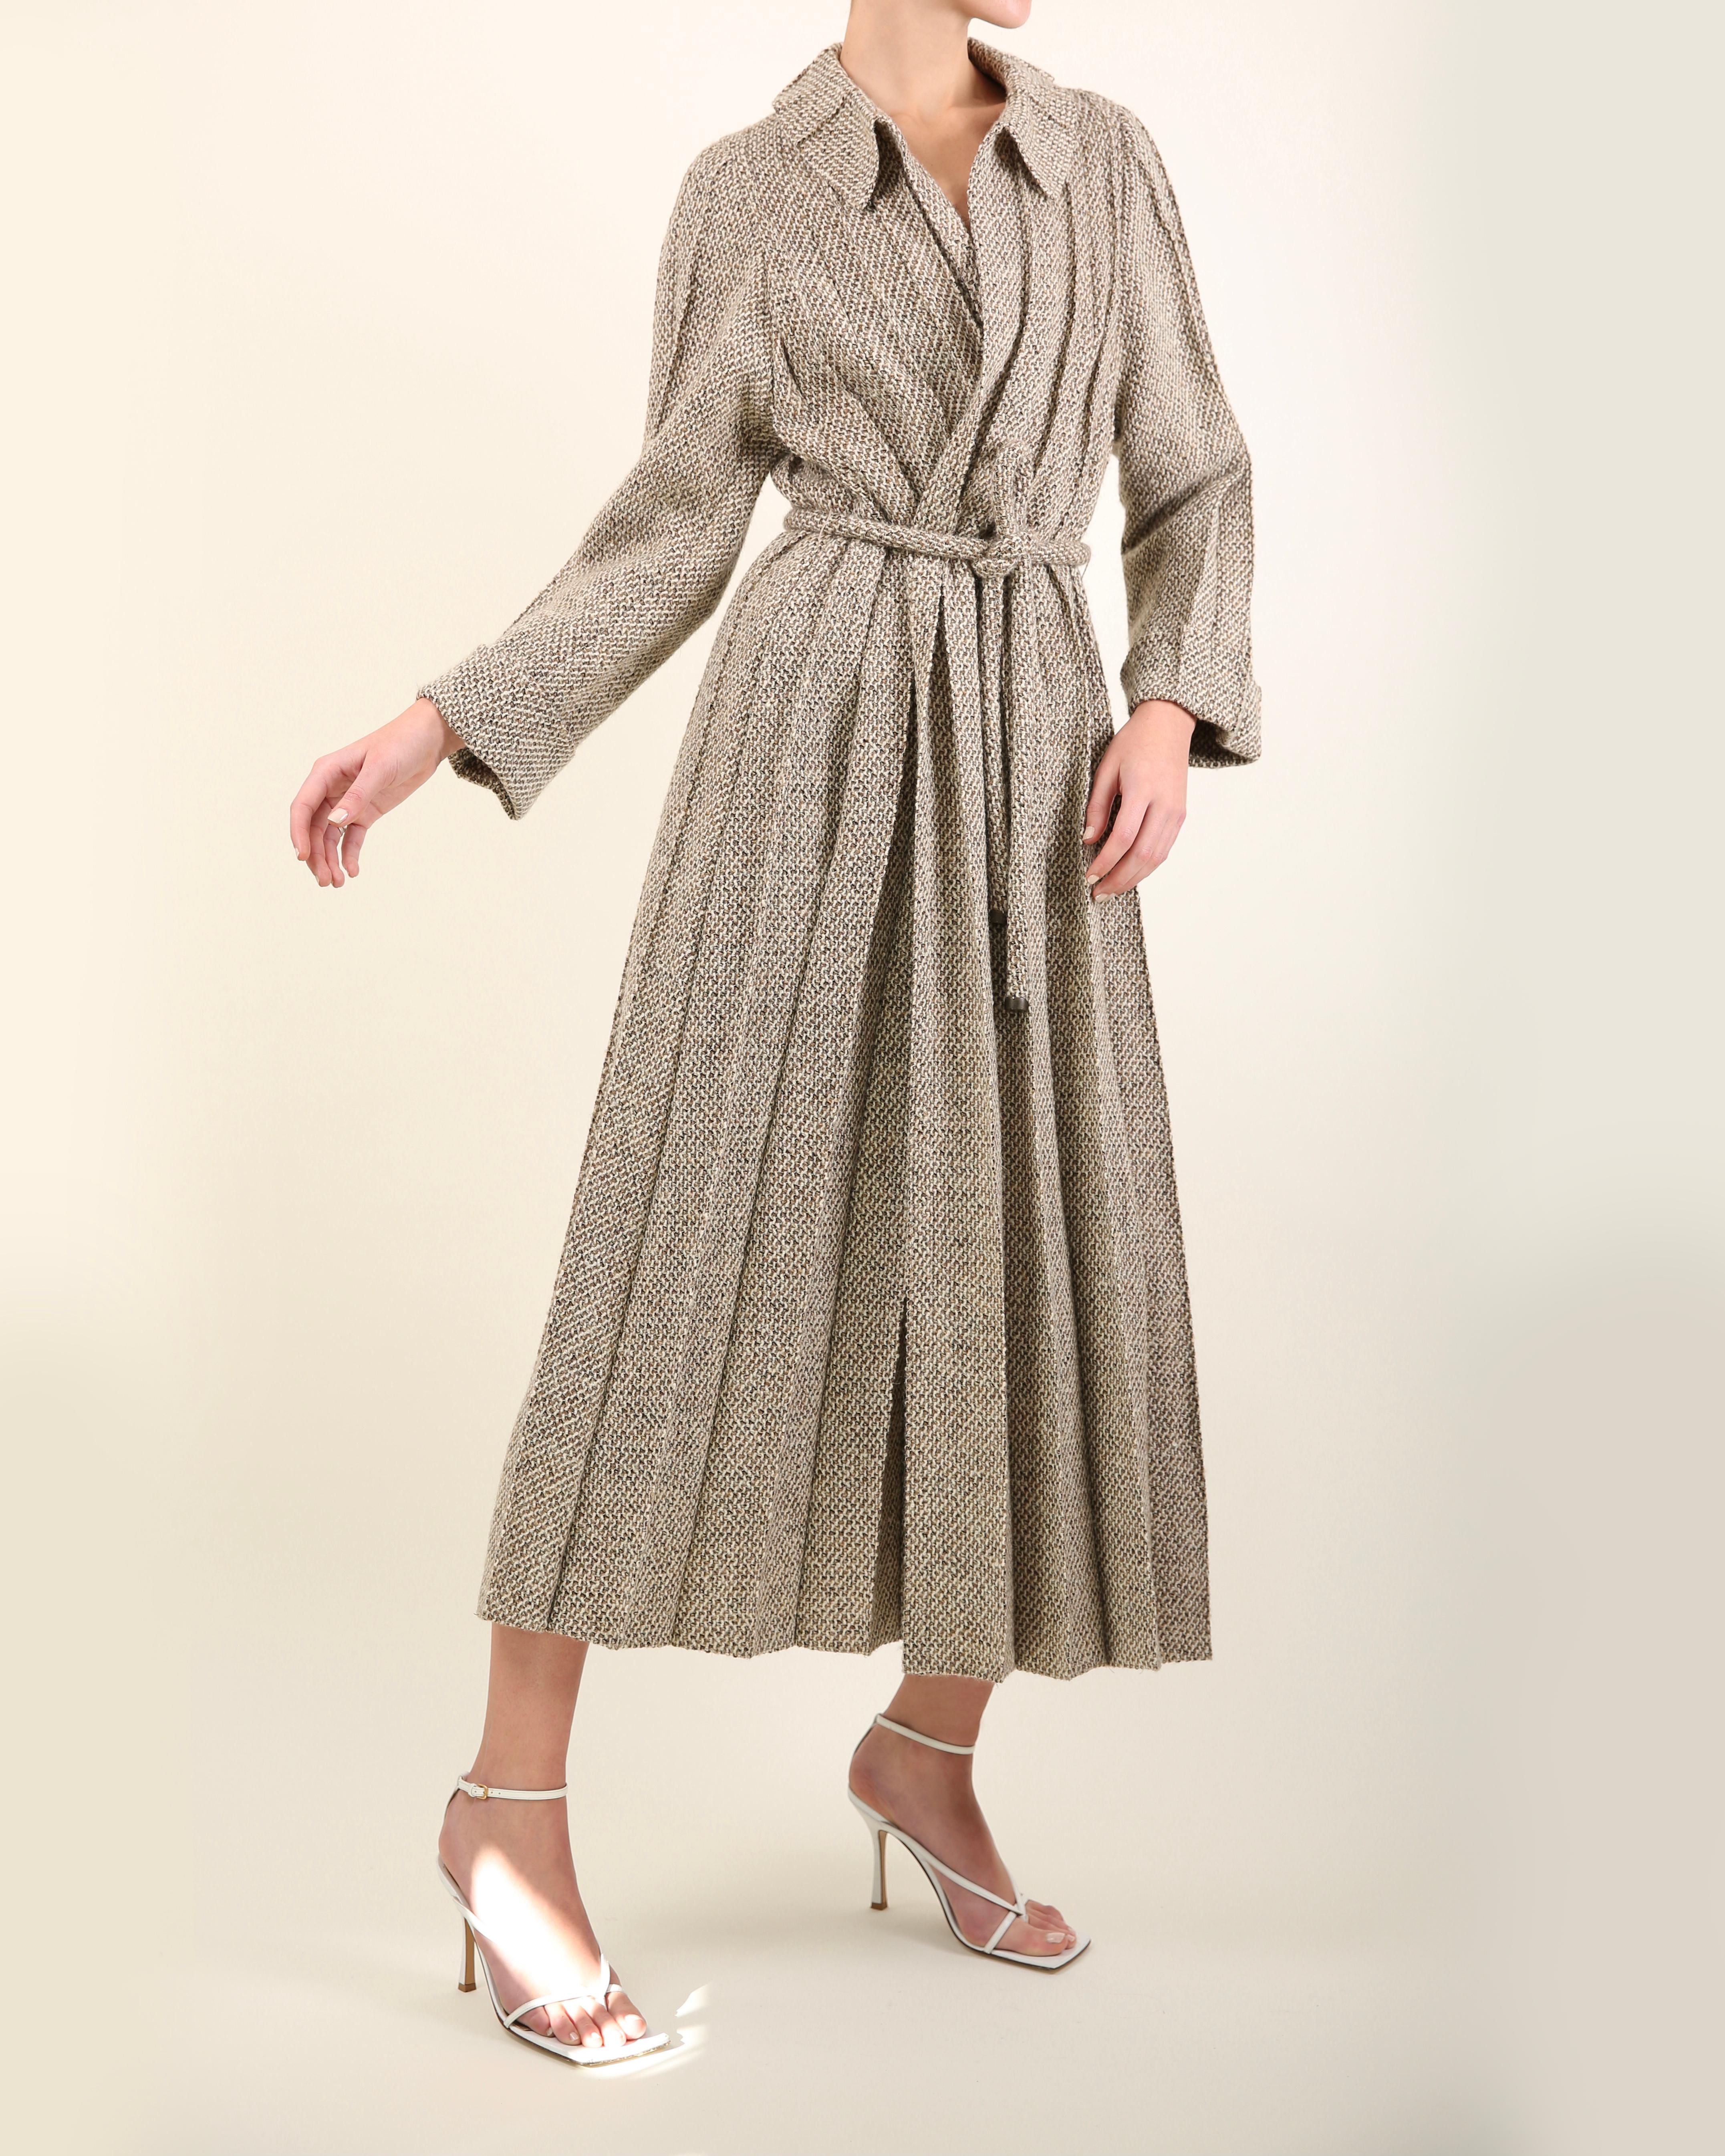 Chanel Fall 1998 brown & white tweed wool long pleated maxi jacket dress coat   For Sale 5